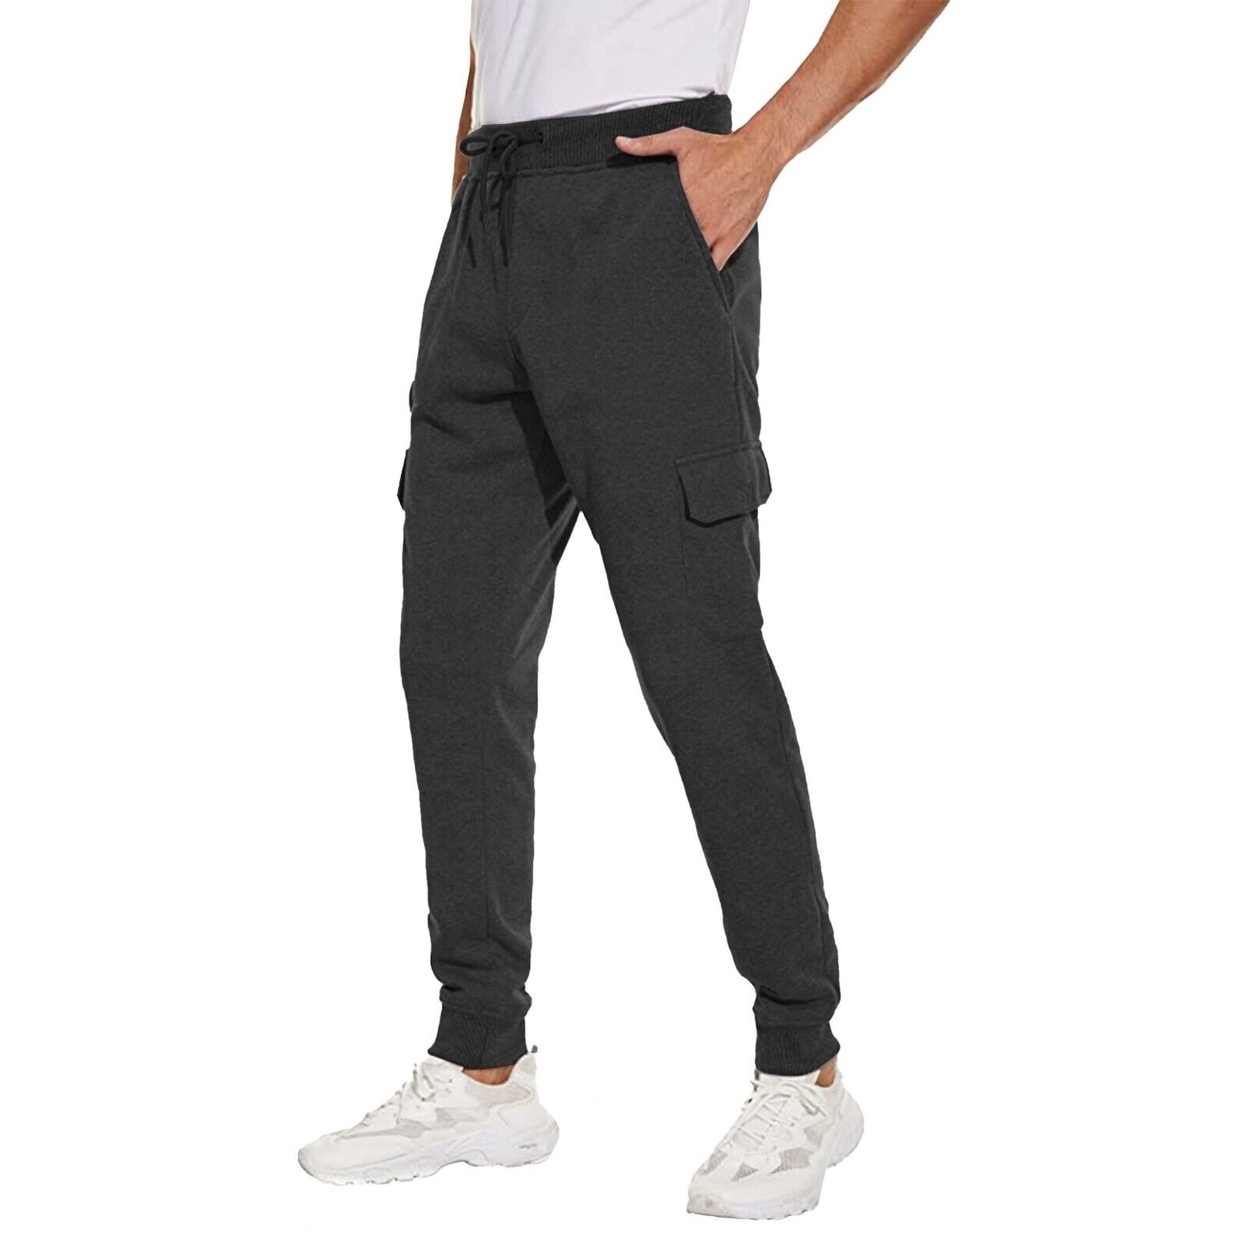 Men's Ultra Soft Winter Warm Thick Sweat Pant Athletic Sherpa Lined Jogger Pants - Charcoal, 3xl